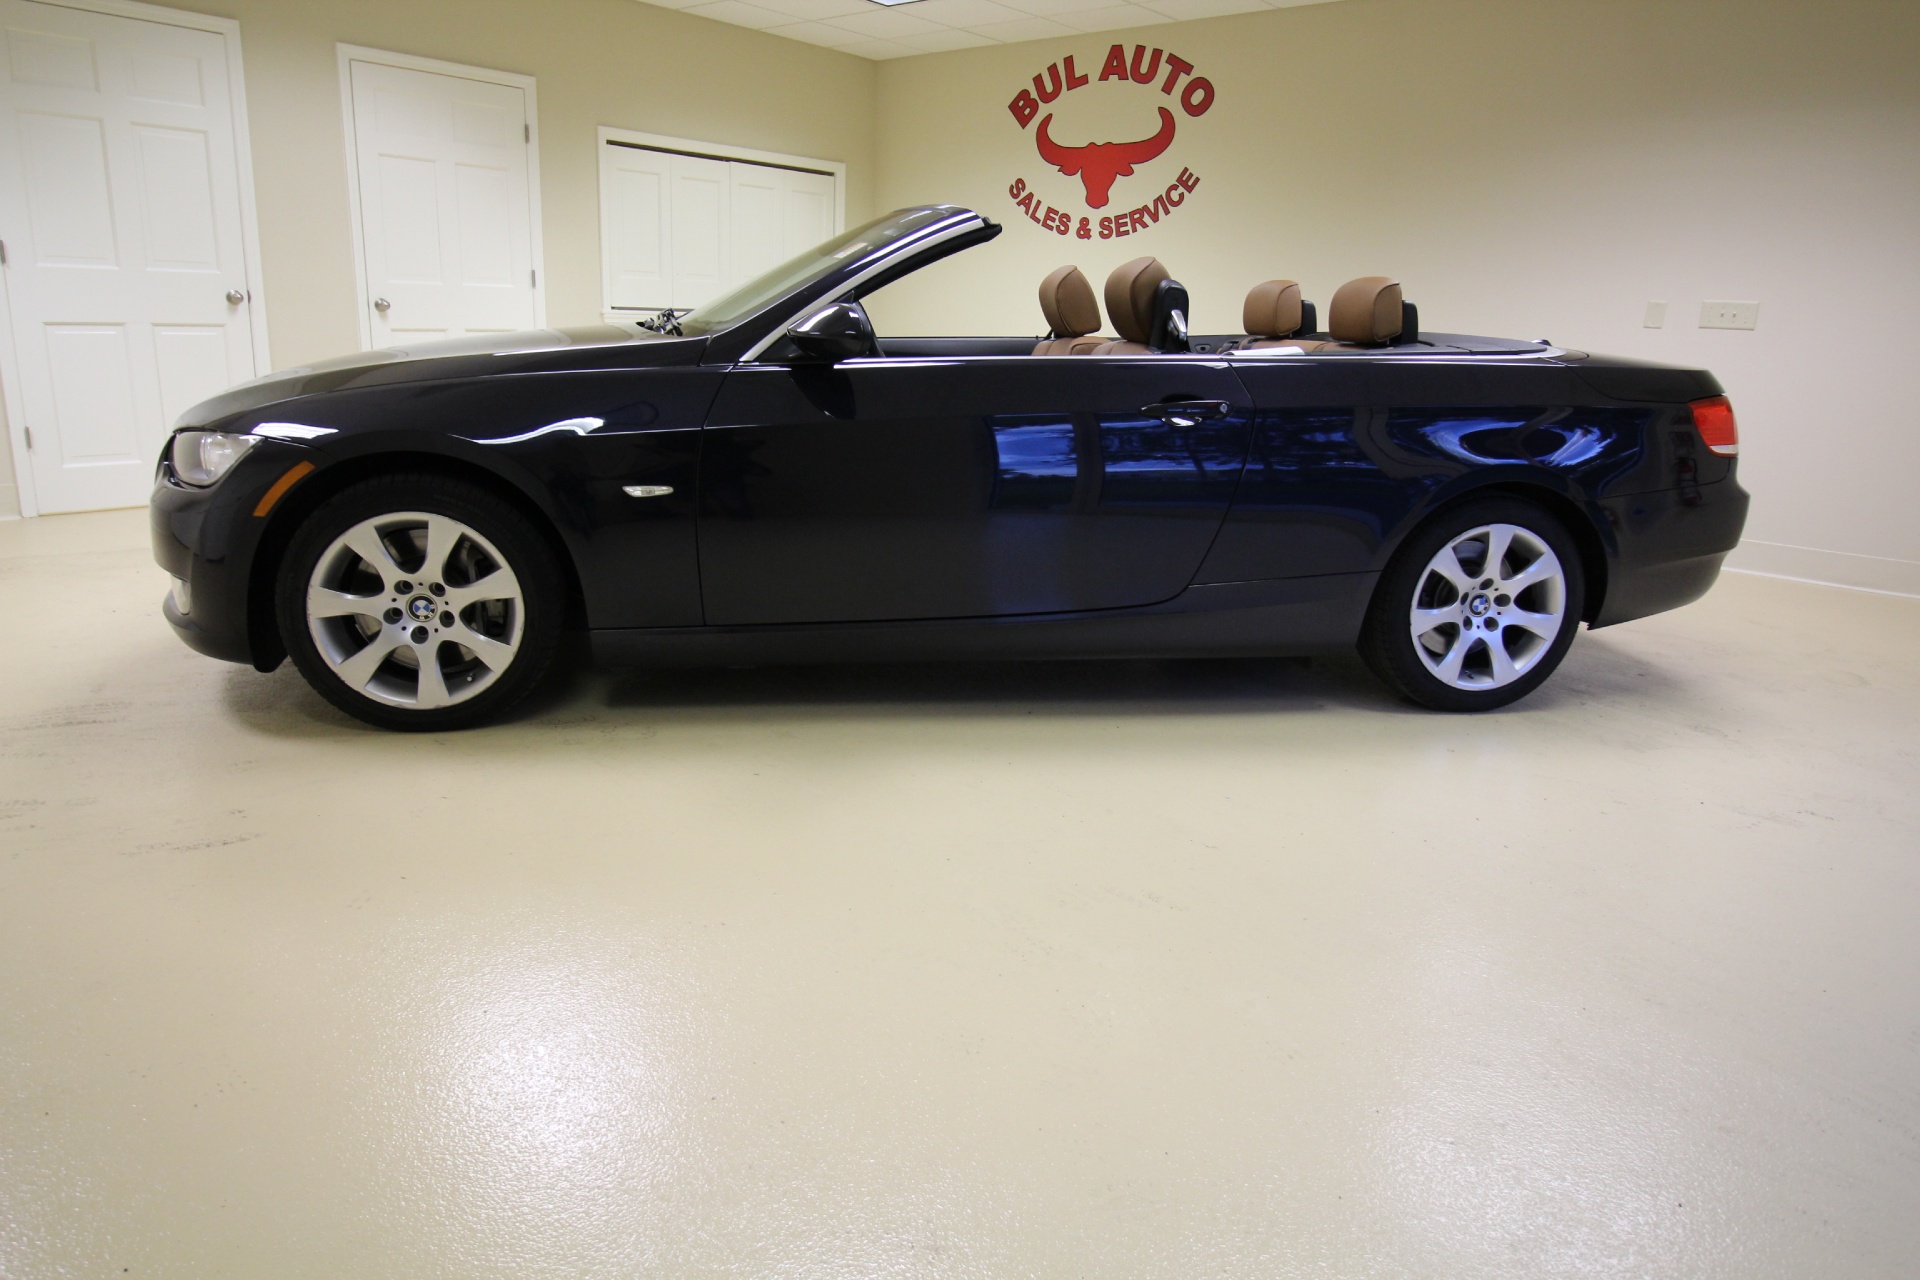 Used 2008 Blue-Metallic BMW 3 Series 335i CONVERTIBLE,PREMIUM PKG,HEATED SEATS,XENONS,BLUETOOTH,COMFORT ACCESS | Albany, NY